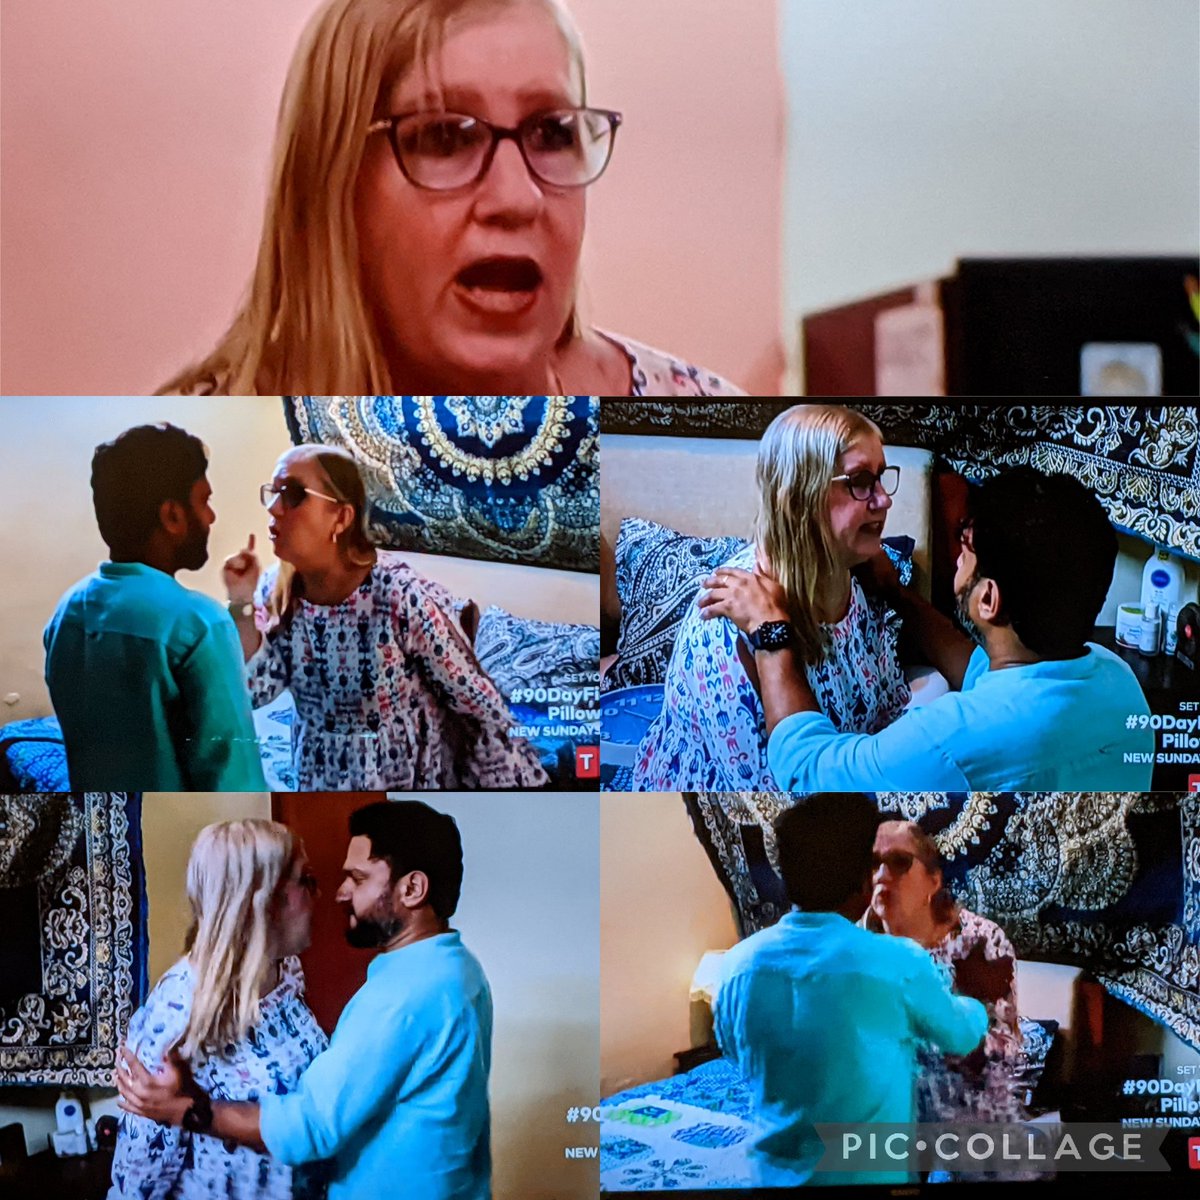 #90DayFianceHappilyEverAfter
#Pillowtalk 
Jenny should carry her old ass home before arthritis really set in ! Sumit will always be on his parents side! She has to understand that! That's It ... https://t.co/BbD6ztX0nm